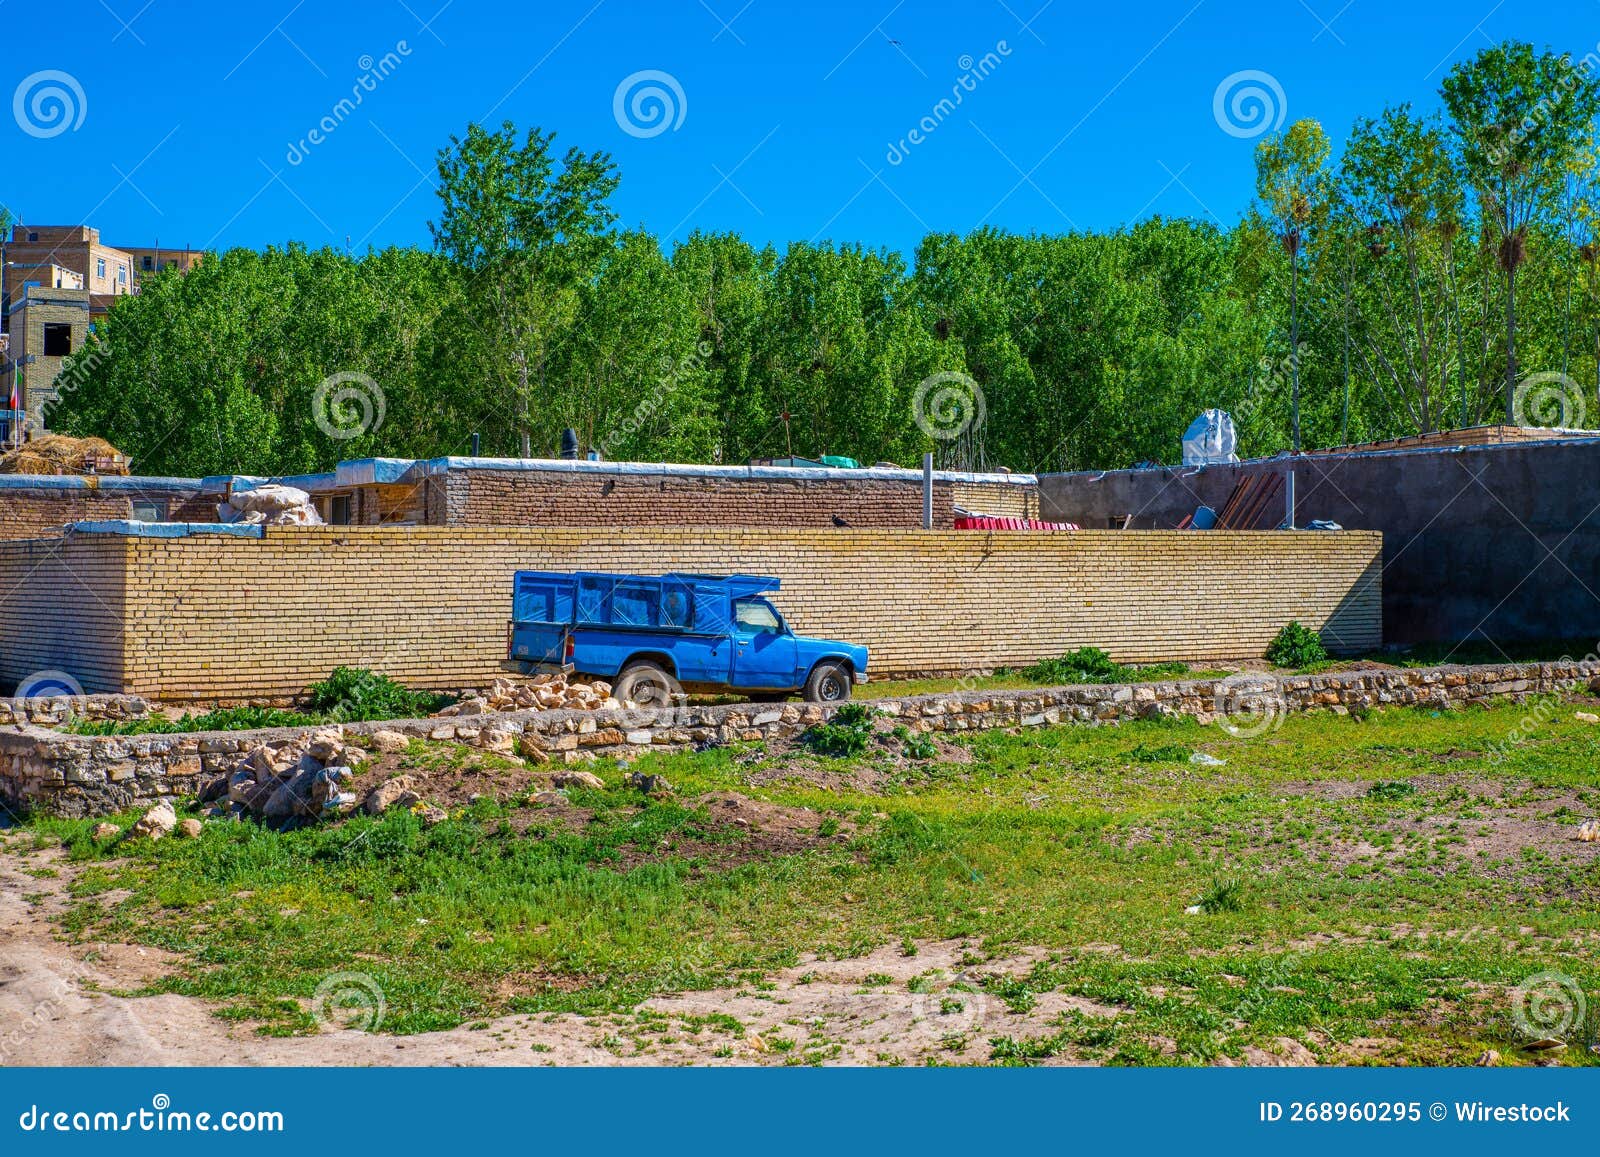 blue car in front of a brick wall in the town of takab in west azerbaijan province, iran.